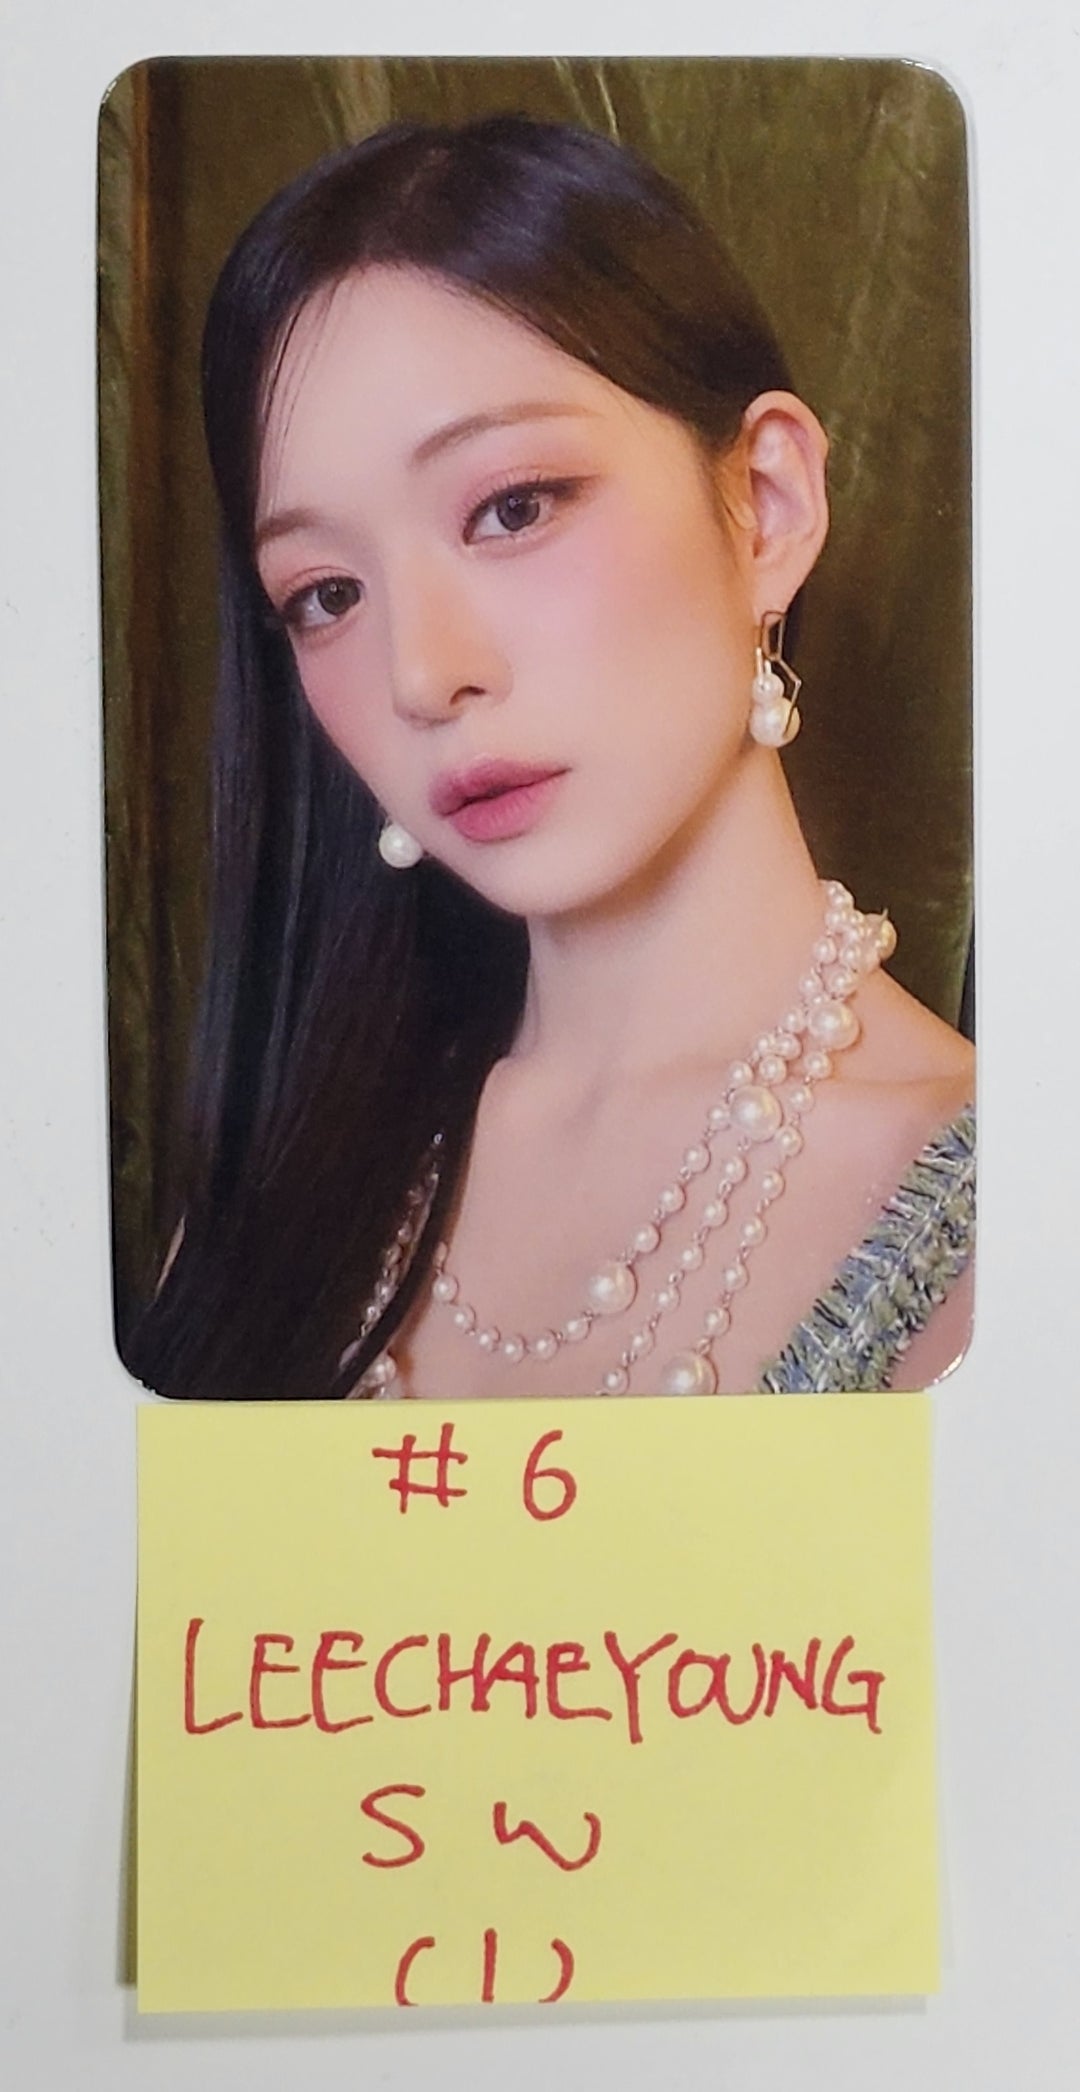 Fromis_9 2023 Season's Greetings - Soundwave Pre-Order Benefit Photocard